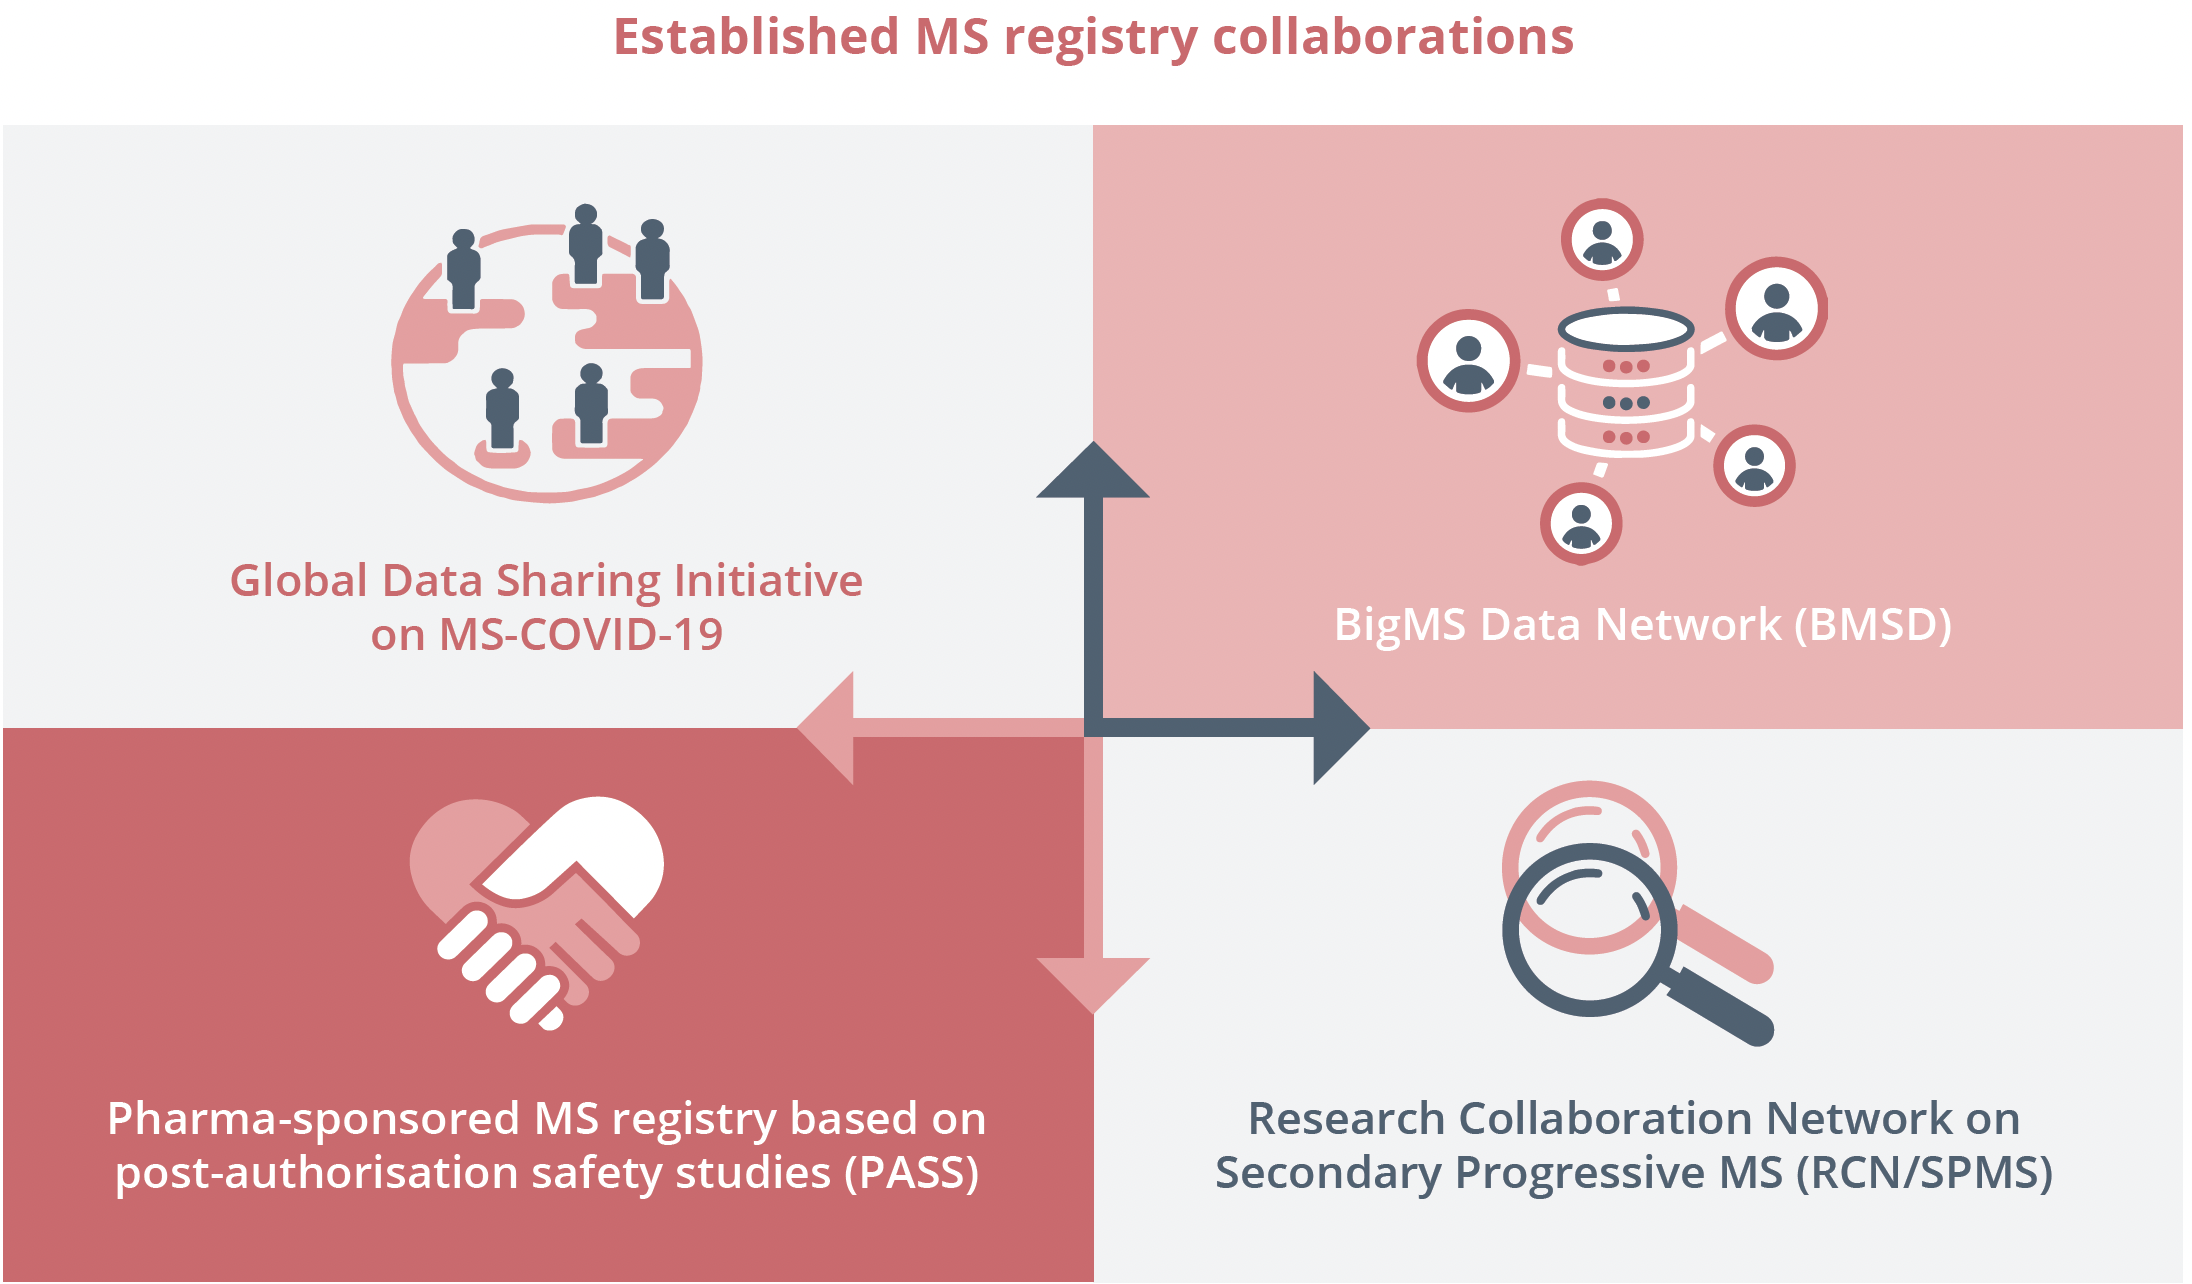 MS registry collaborations include MS-COVID-19, BMSD, PASS and RCN-SPMS